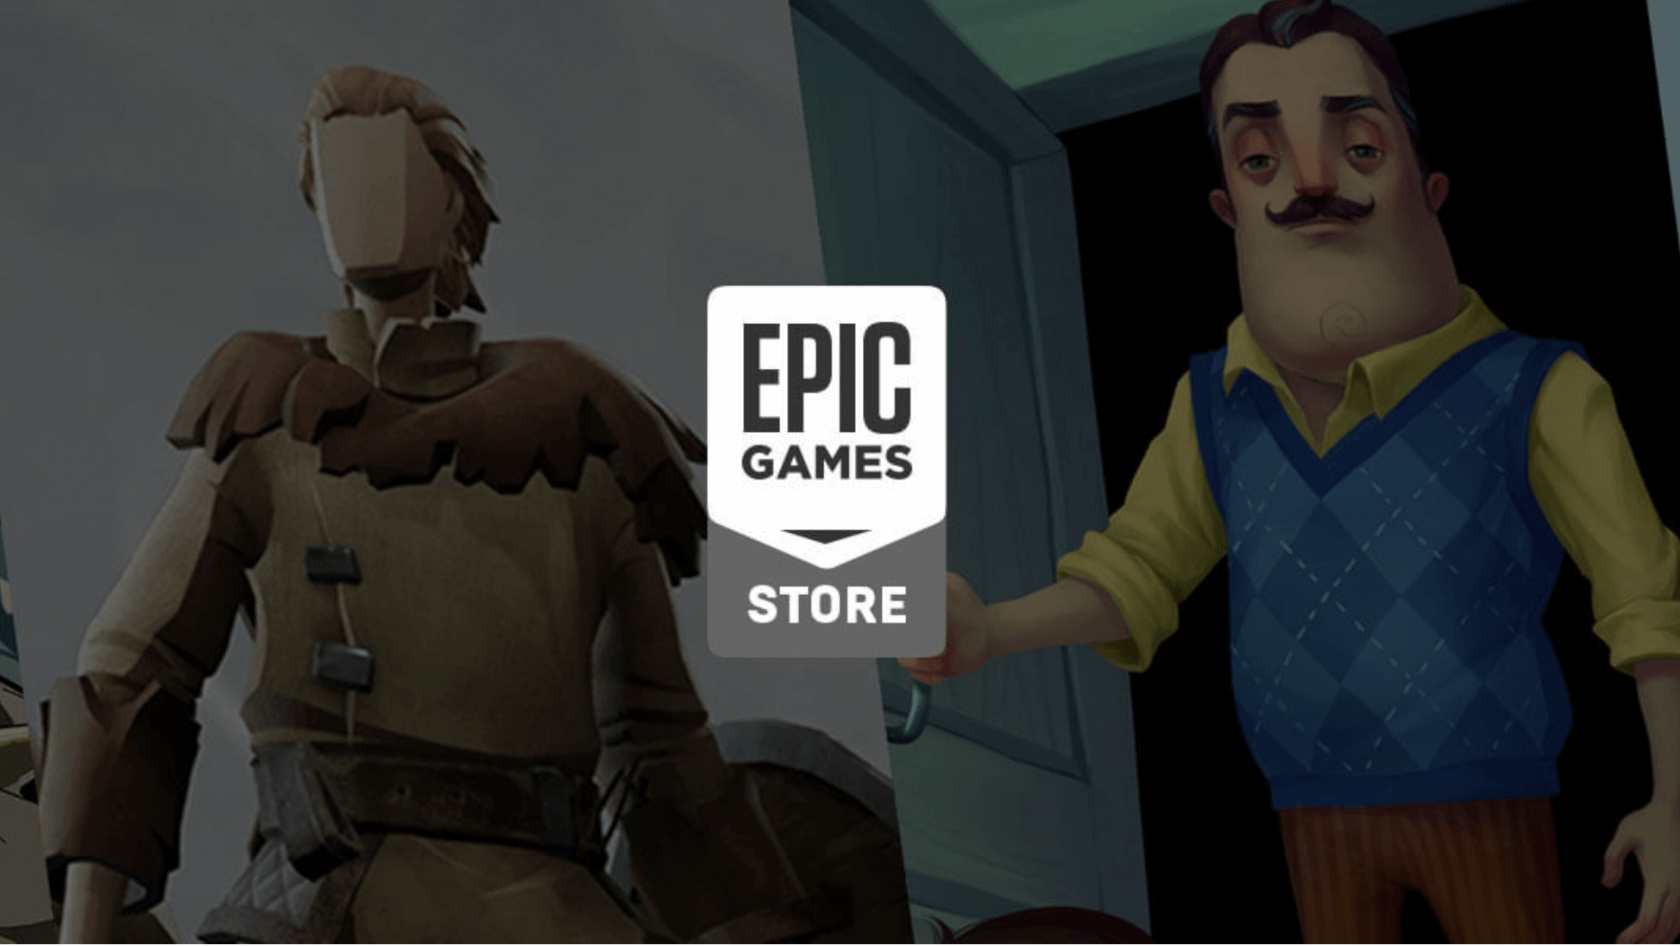 Epic: no porn or crappy games on our store, exclusivity deals will eventually stop